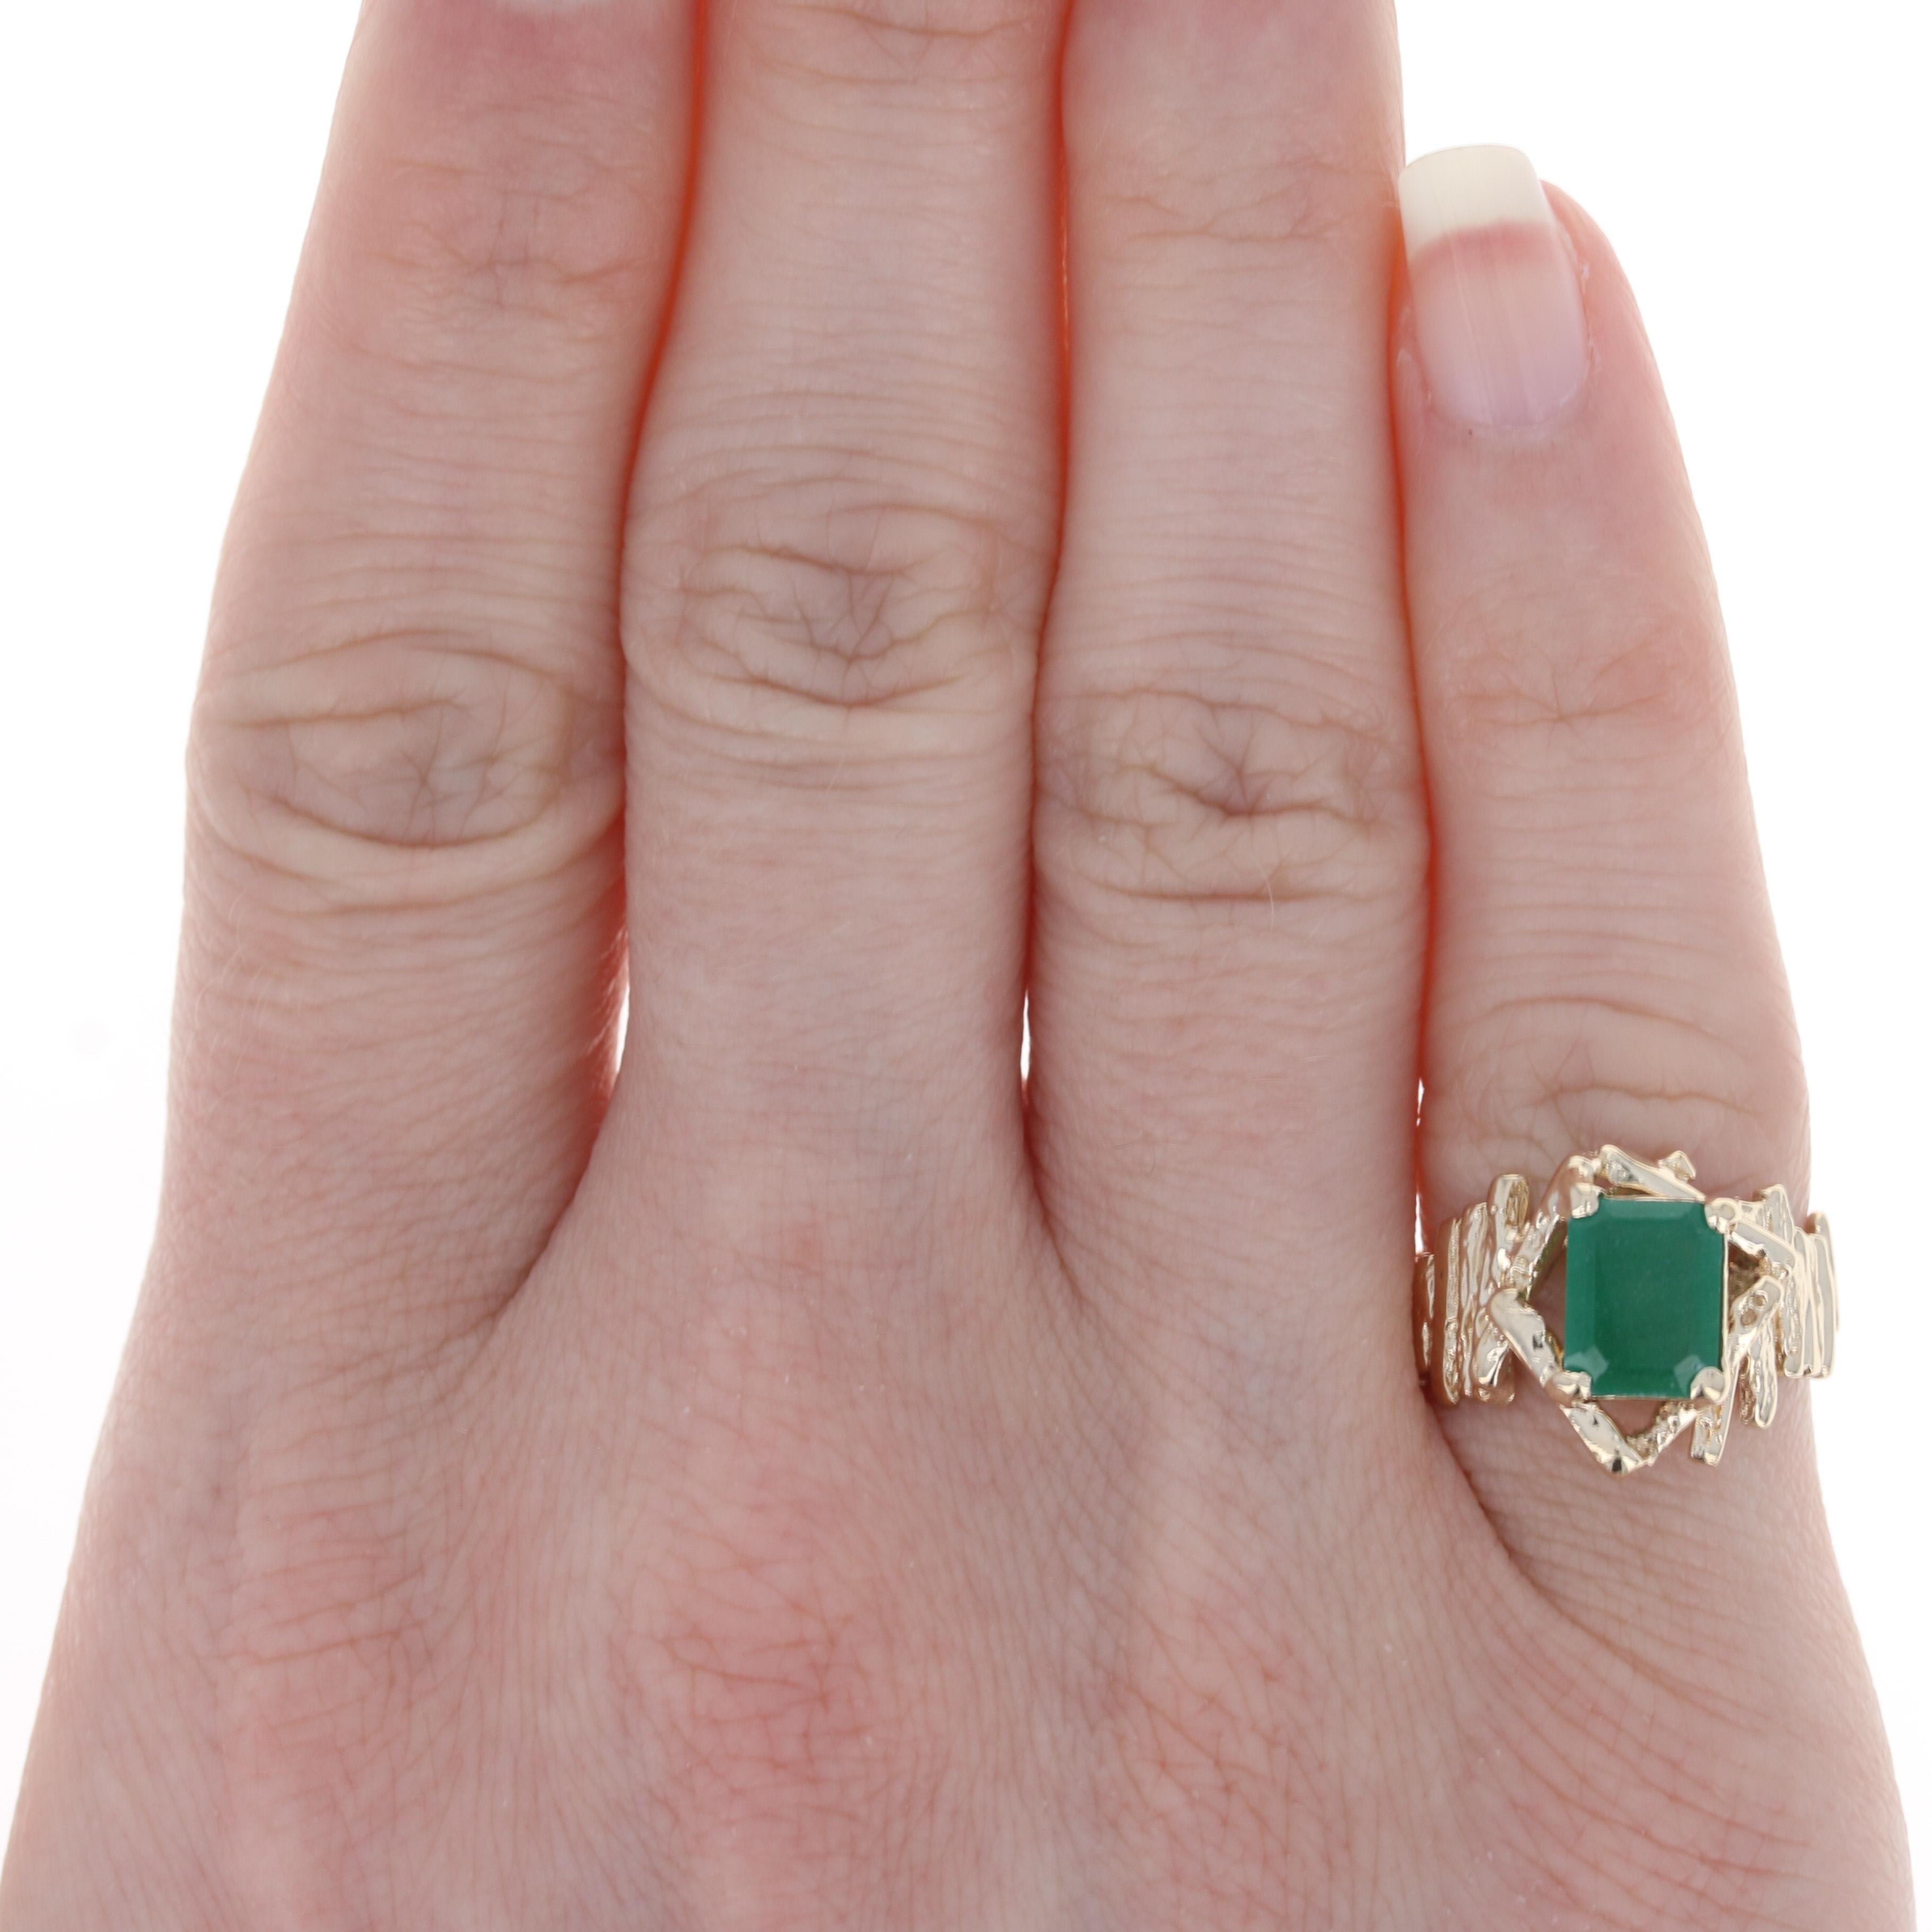 Size: 4 1/2

Metal Content: 14k Yellow Gold

Stone Information
Synthetic Emerald
Carat: 1.33ct
Cut: Emerald 
Color: Green 
Size: 8.2mm x 6.1mm

Style: Solitaire
Features: Textured

Measurements
Face Height (north to south): 9/16